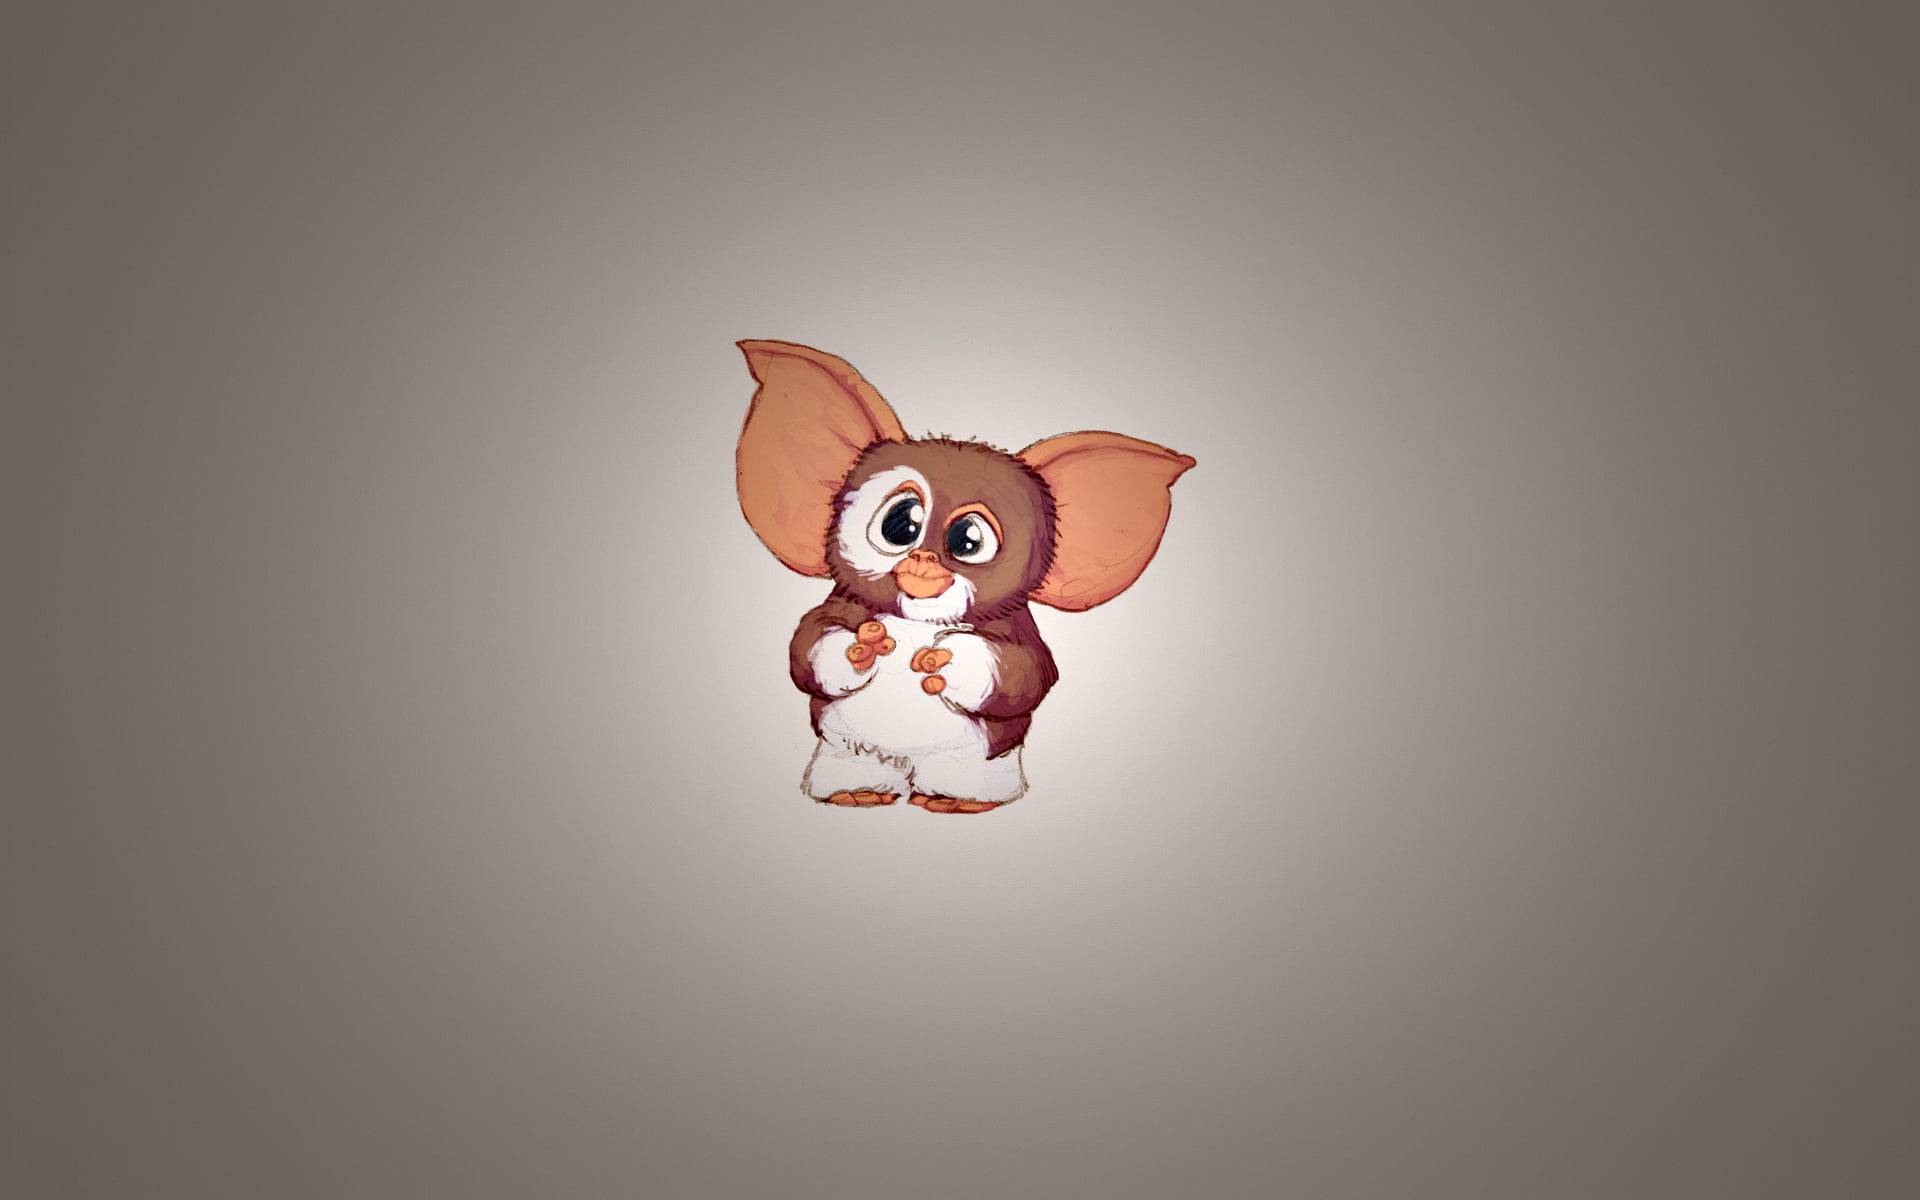 The Gremlins character wallpaper, eared, a mythical creature